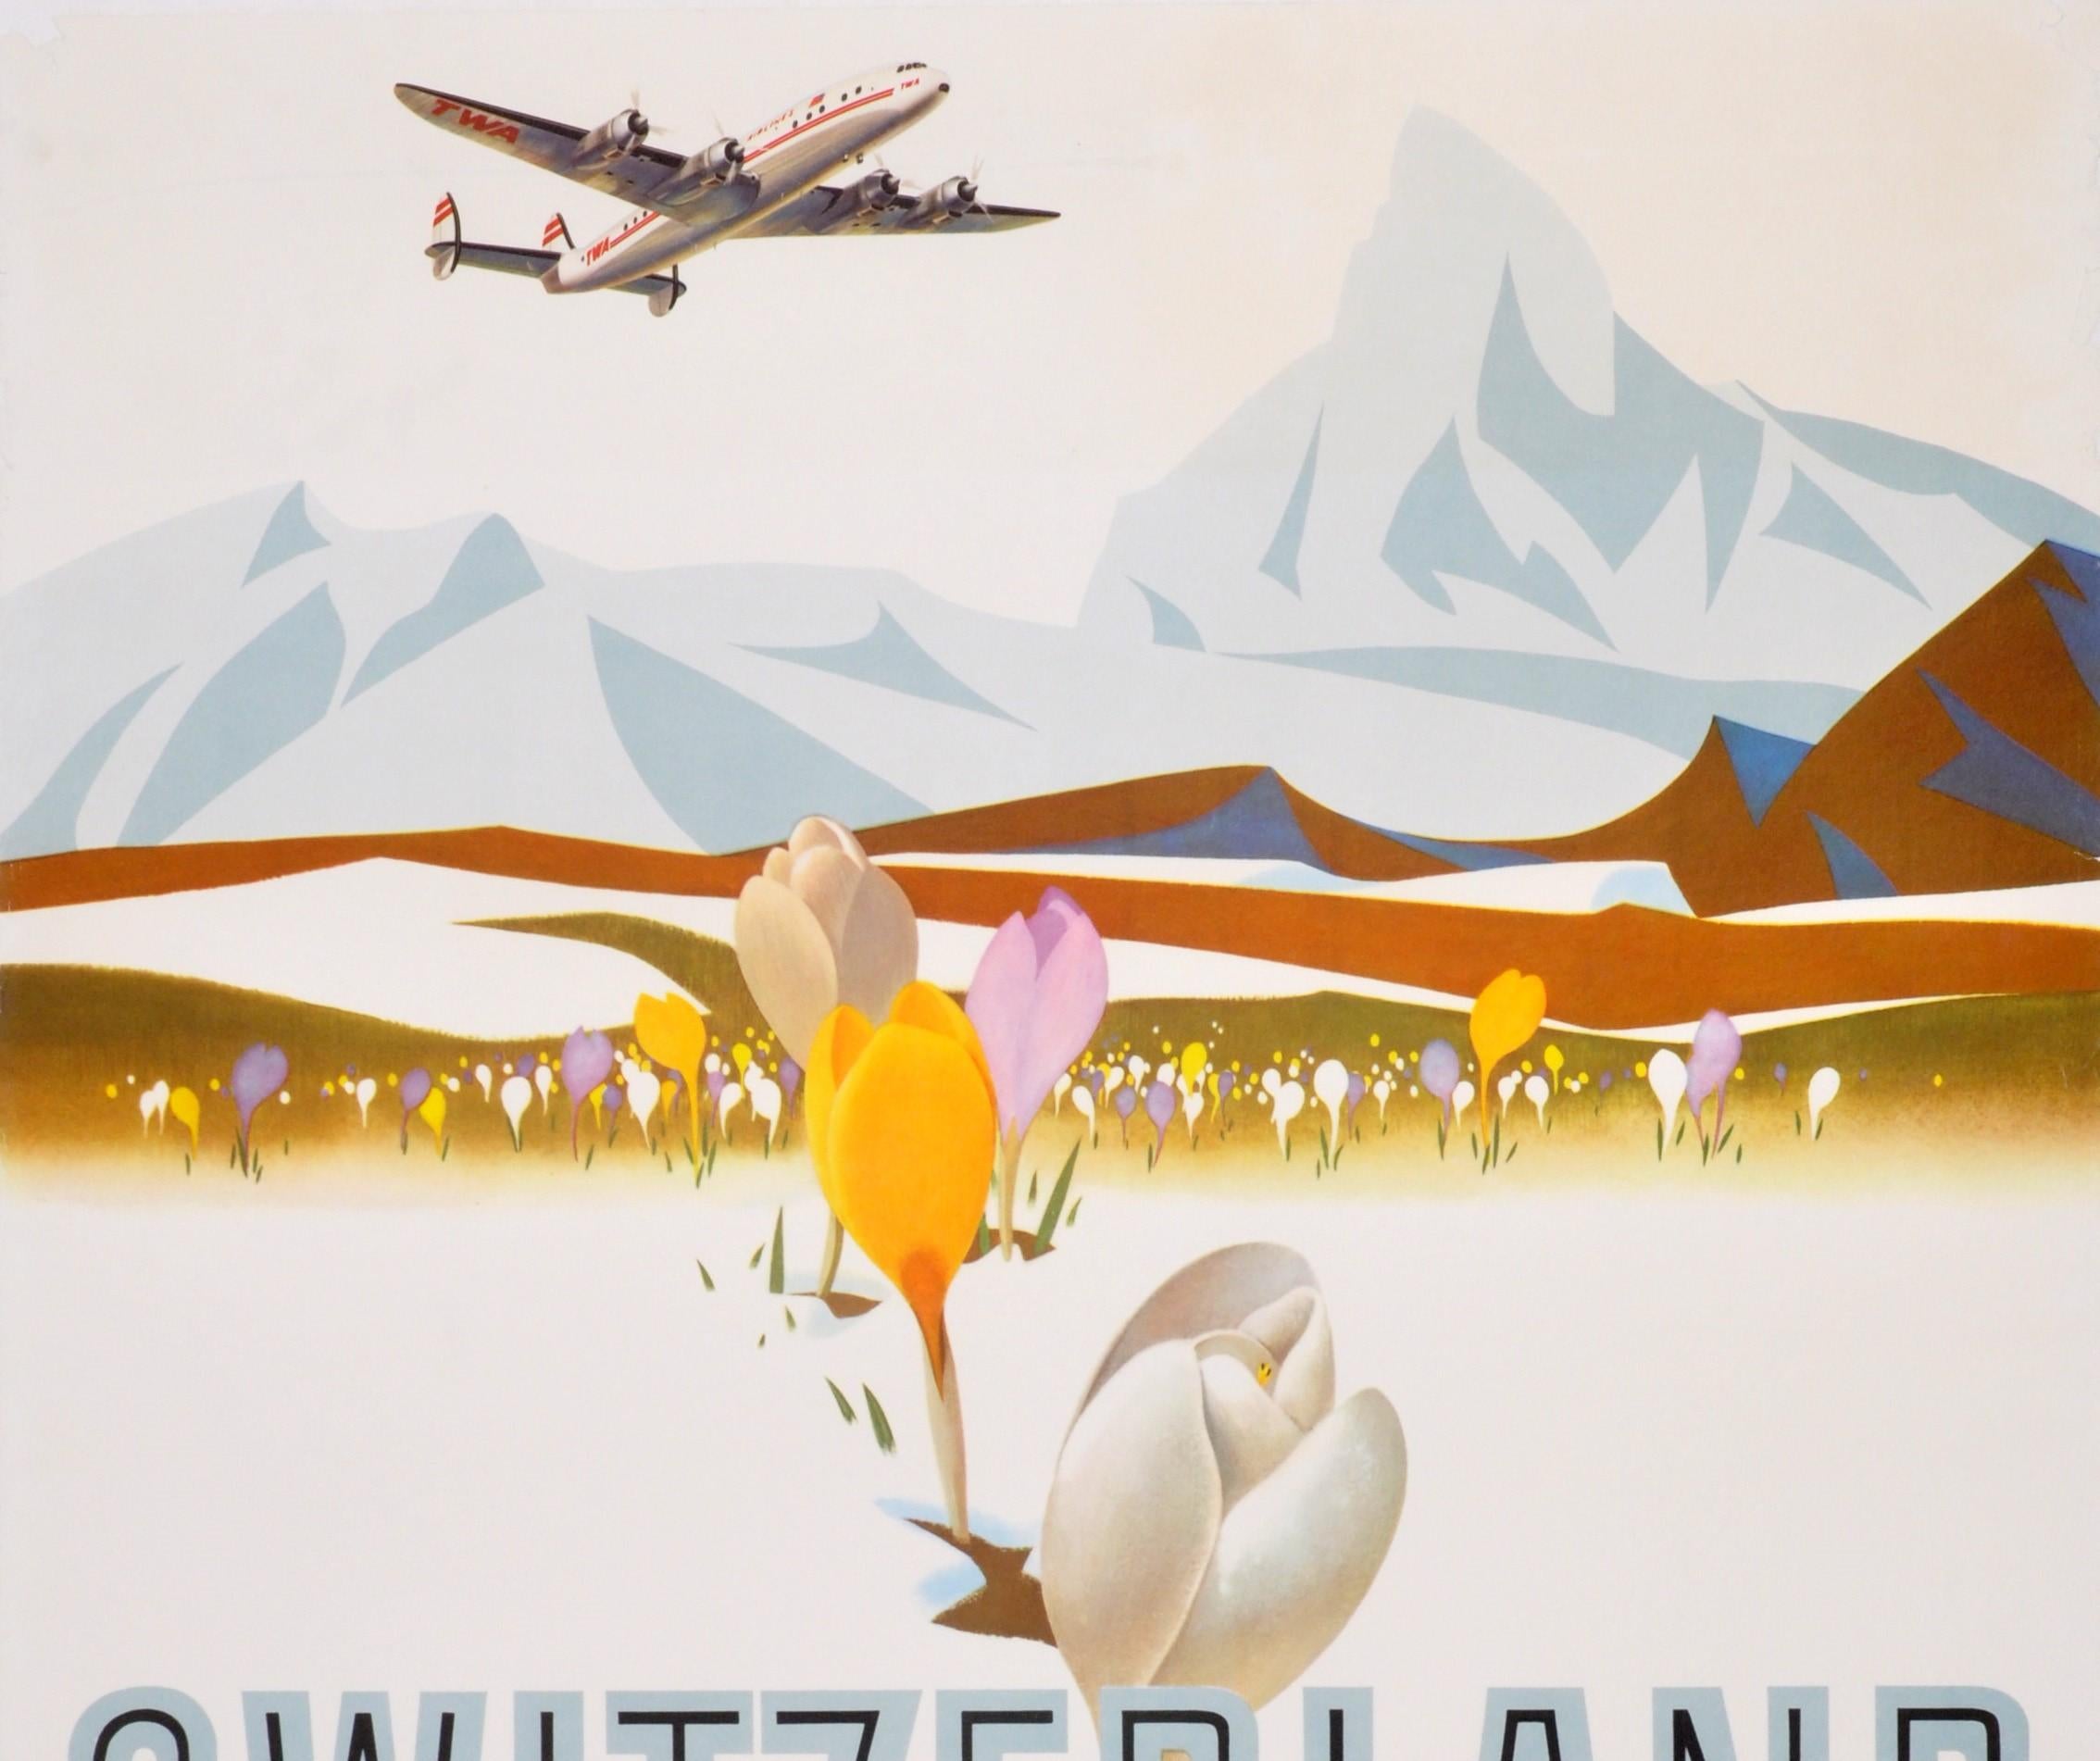 Original vintage travel poster for Switzerland Fly TWA designed by renowned American artist David Klein (1918-2005) most noted for his Trans World Airlines poster artwork. Great design showing colourful spring crocus flowers in the foreground